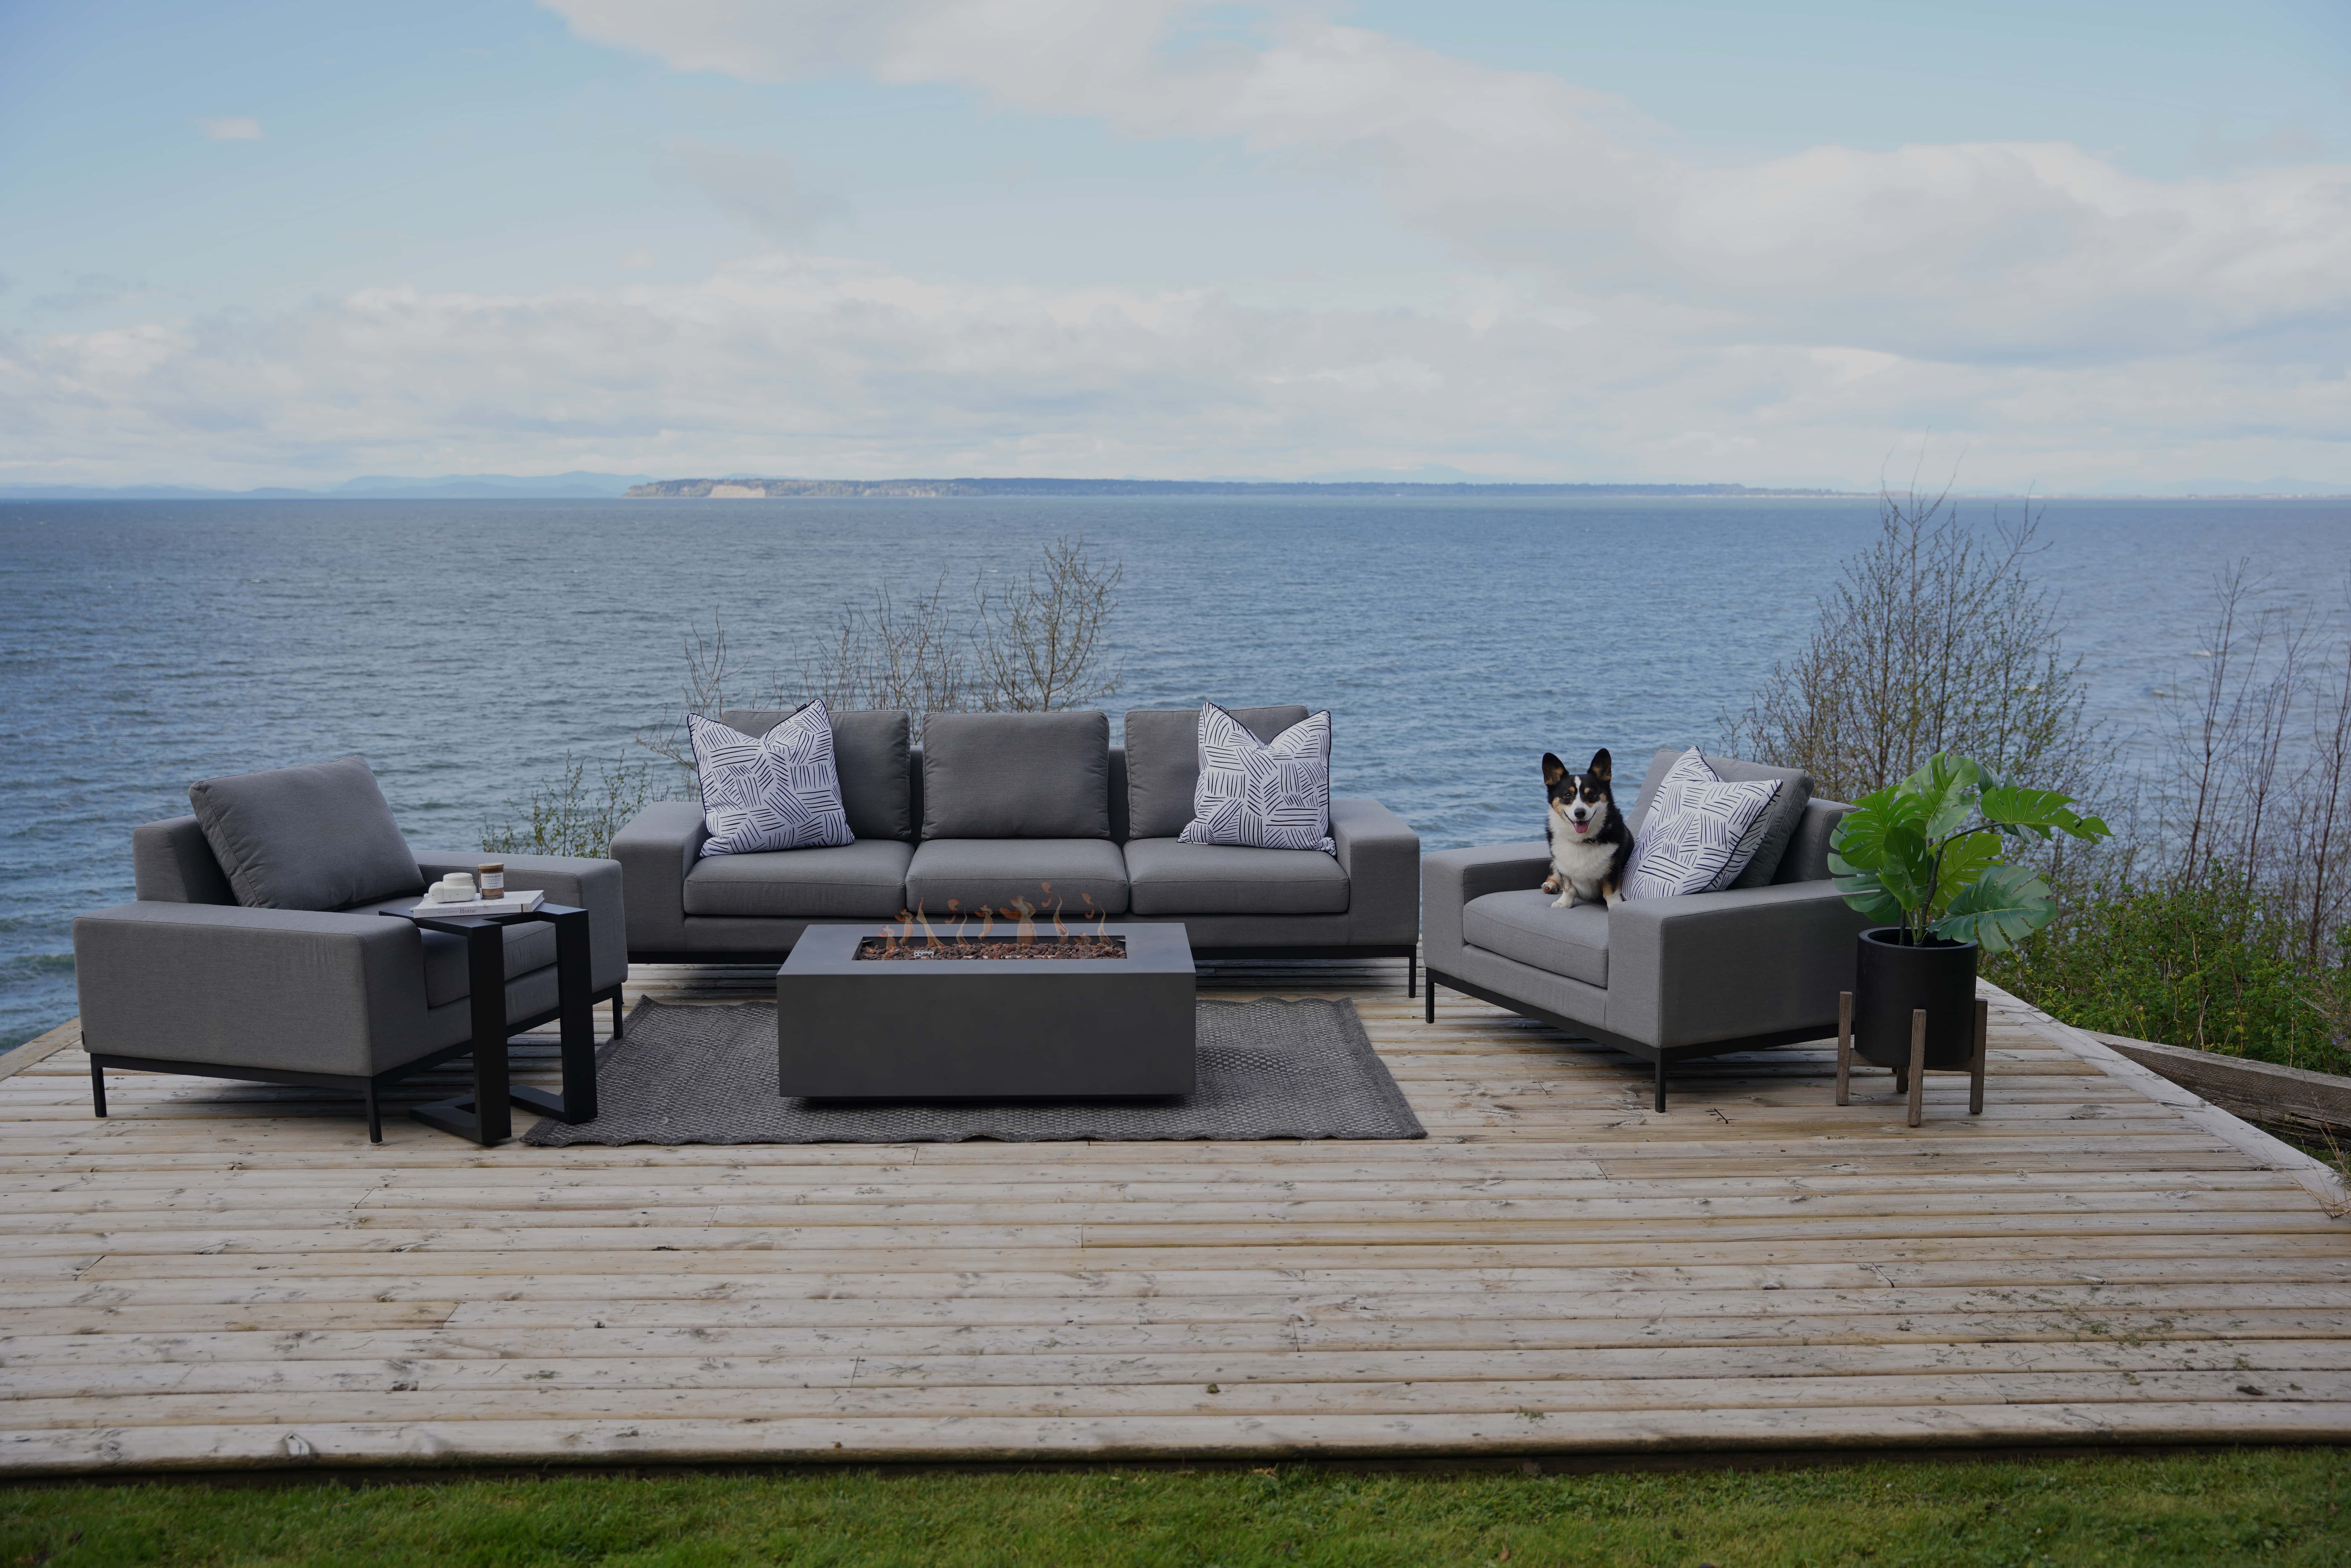 West Coast Patio Furniture available now at Q Living Furniture